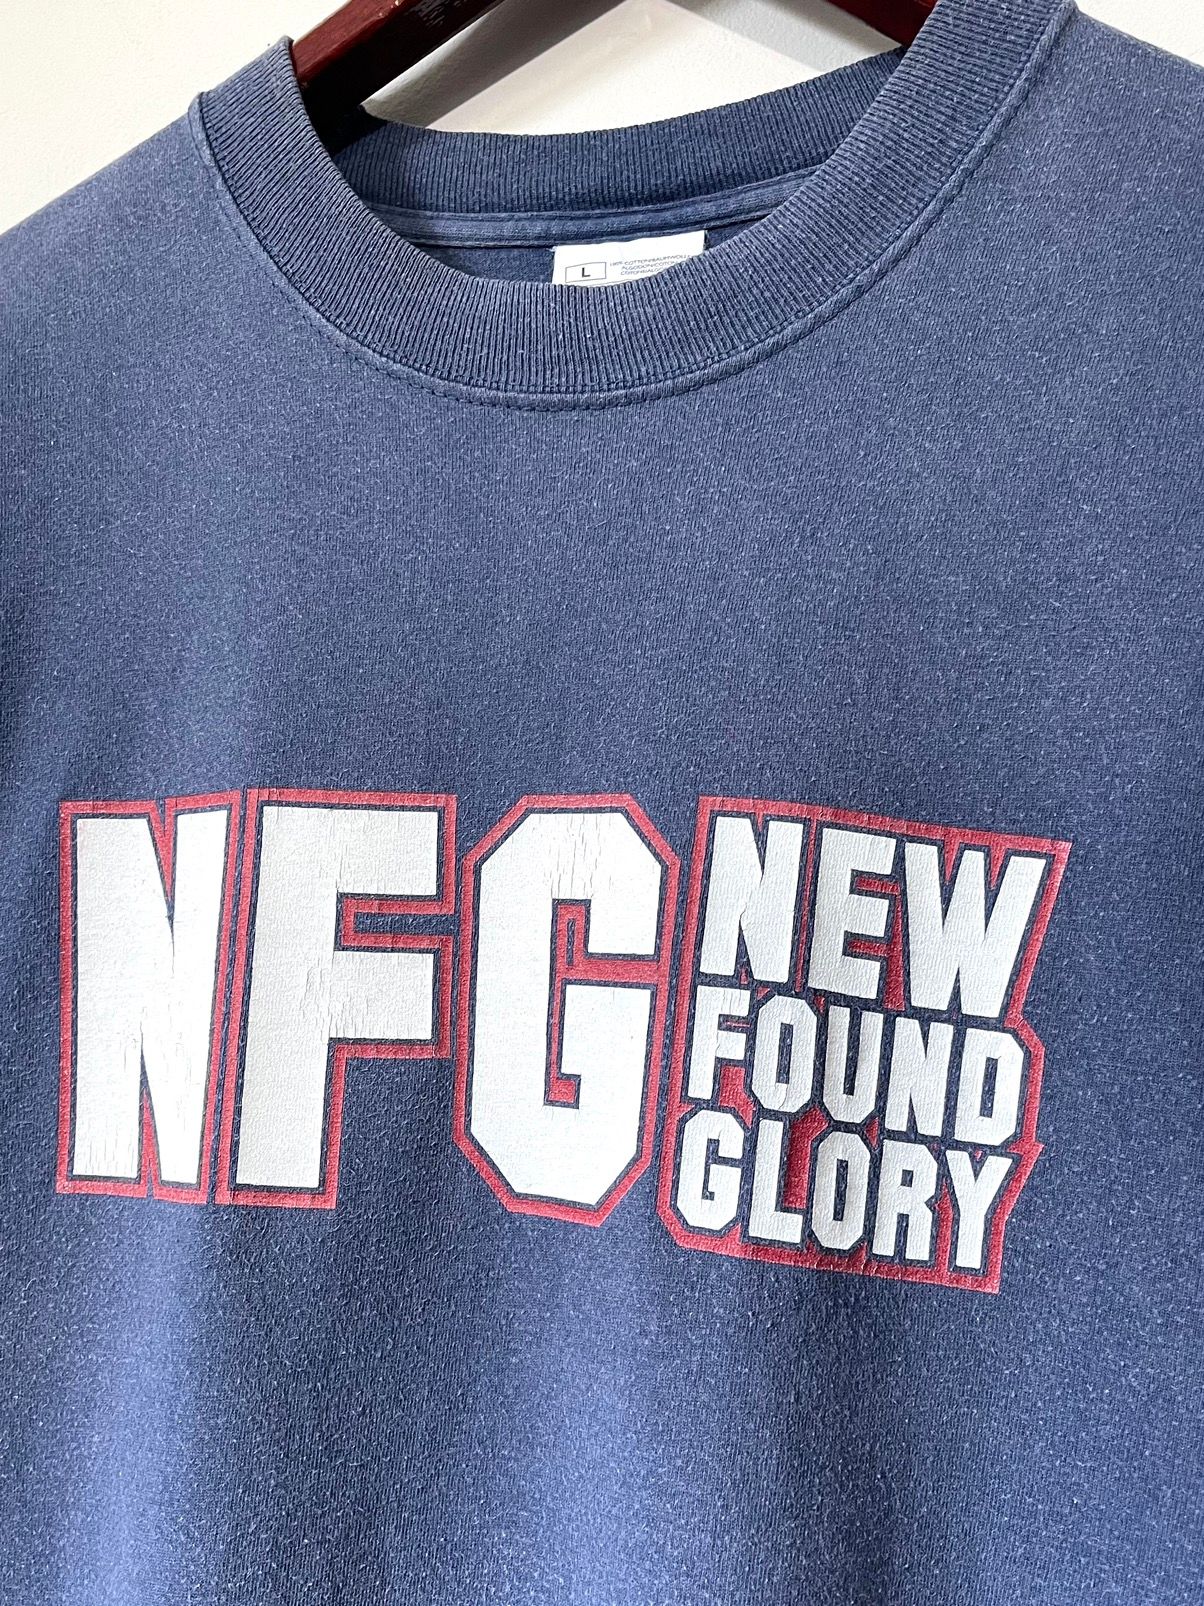 Vintage Vintage New Found Glory Screen Stars T-shirt Size US L / EU 52-54 / 3 - 2 Preview